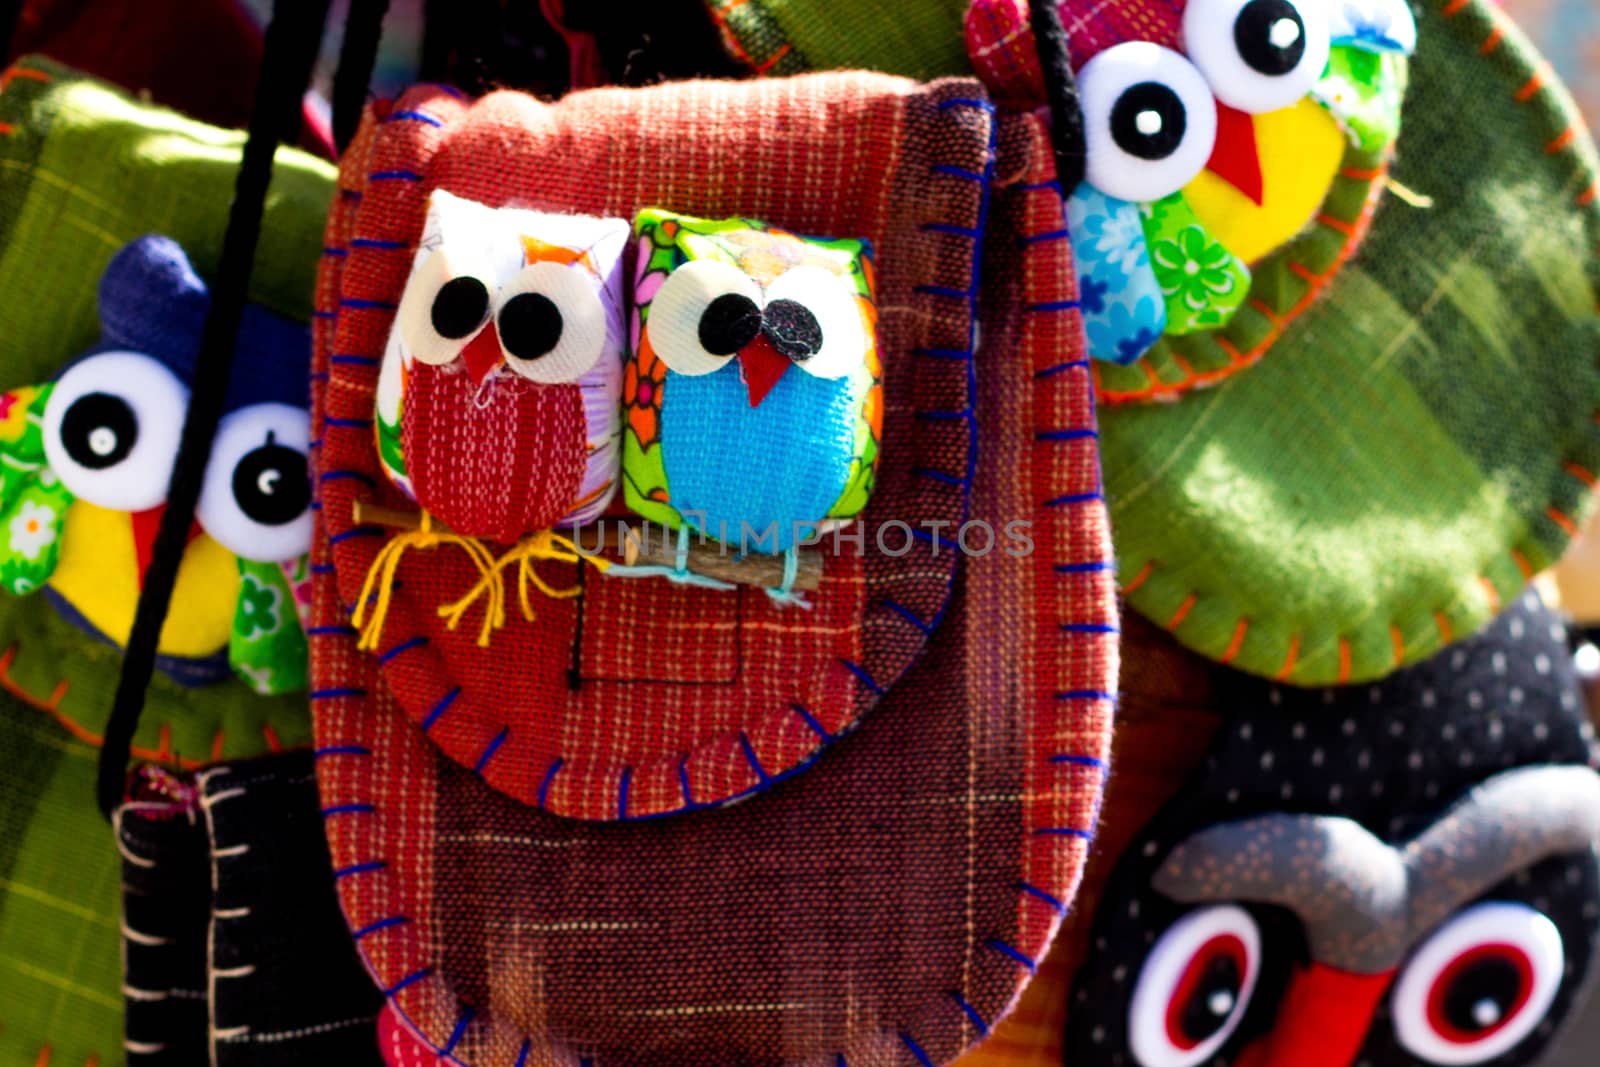 two owls sewn into a bag for sale by Carbonas